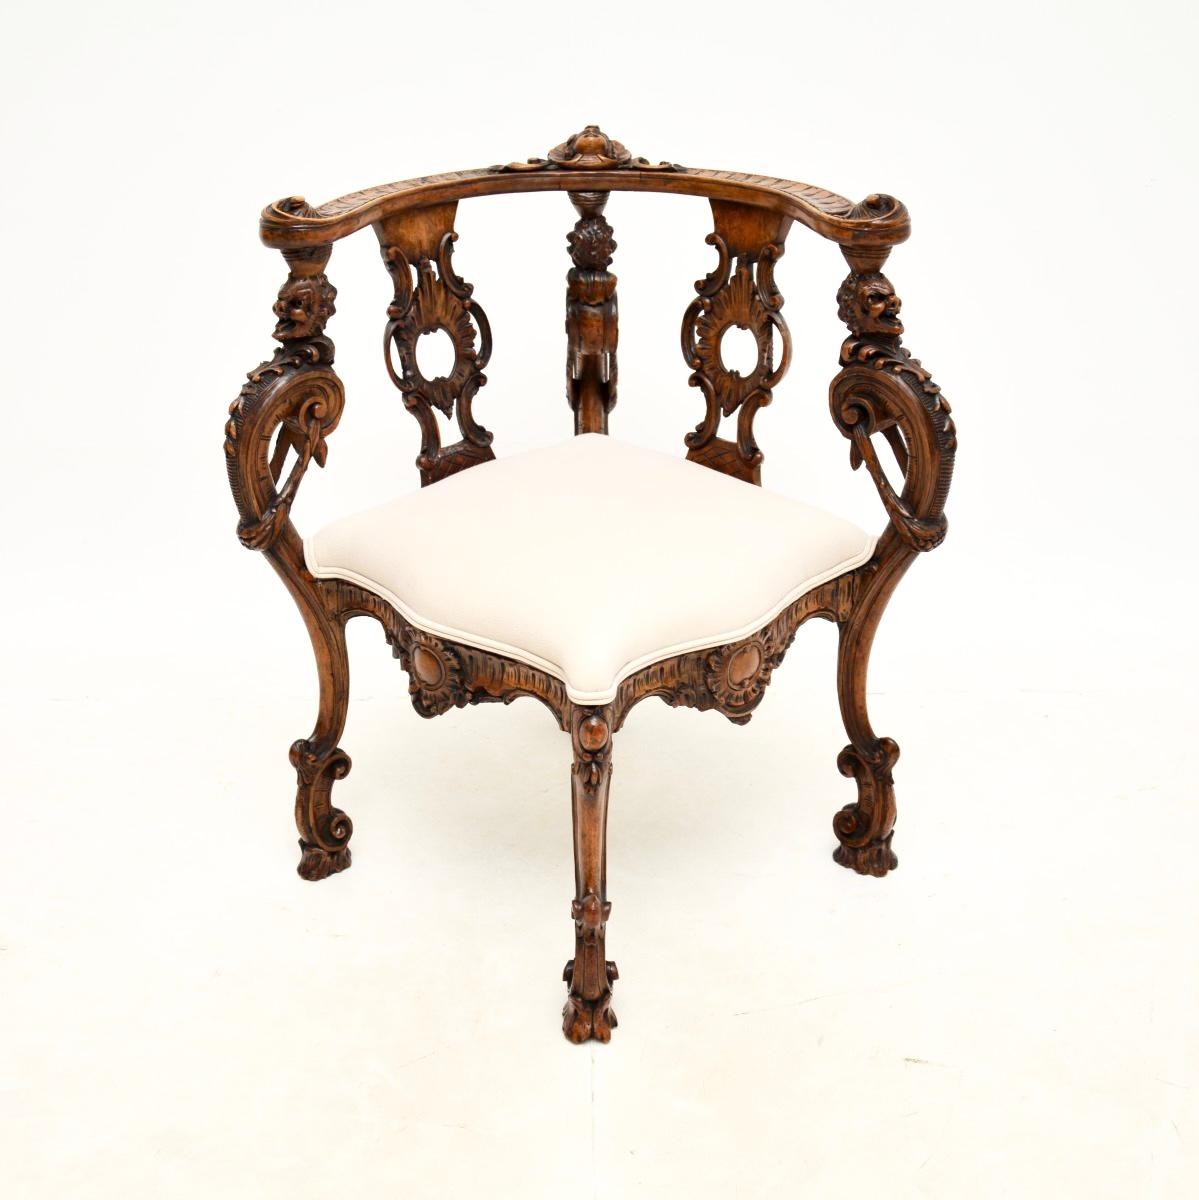 A beautiful and impressive antique carved walnut corner chair. This was most likely made in Italy, we would date it to around the 1790’s period.

It is of extremely fine quality, with crisp and interesting carving, including gargoyles around the